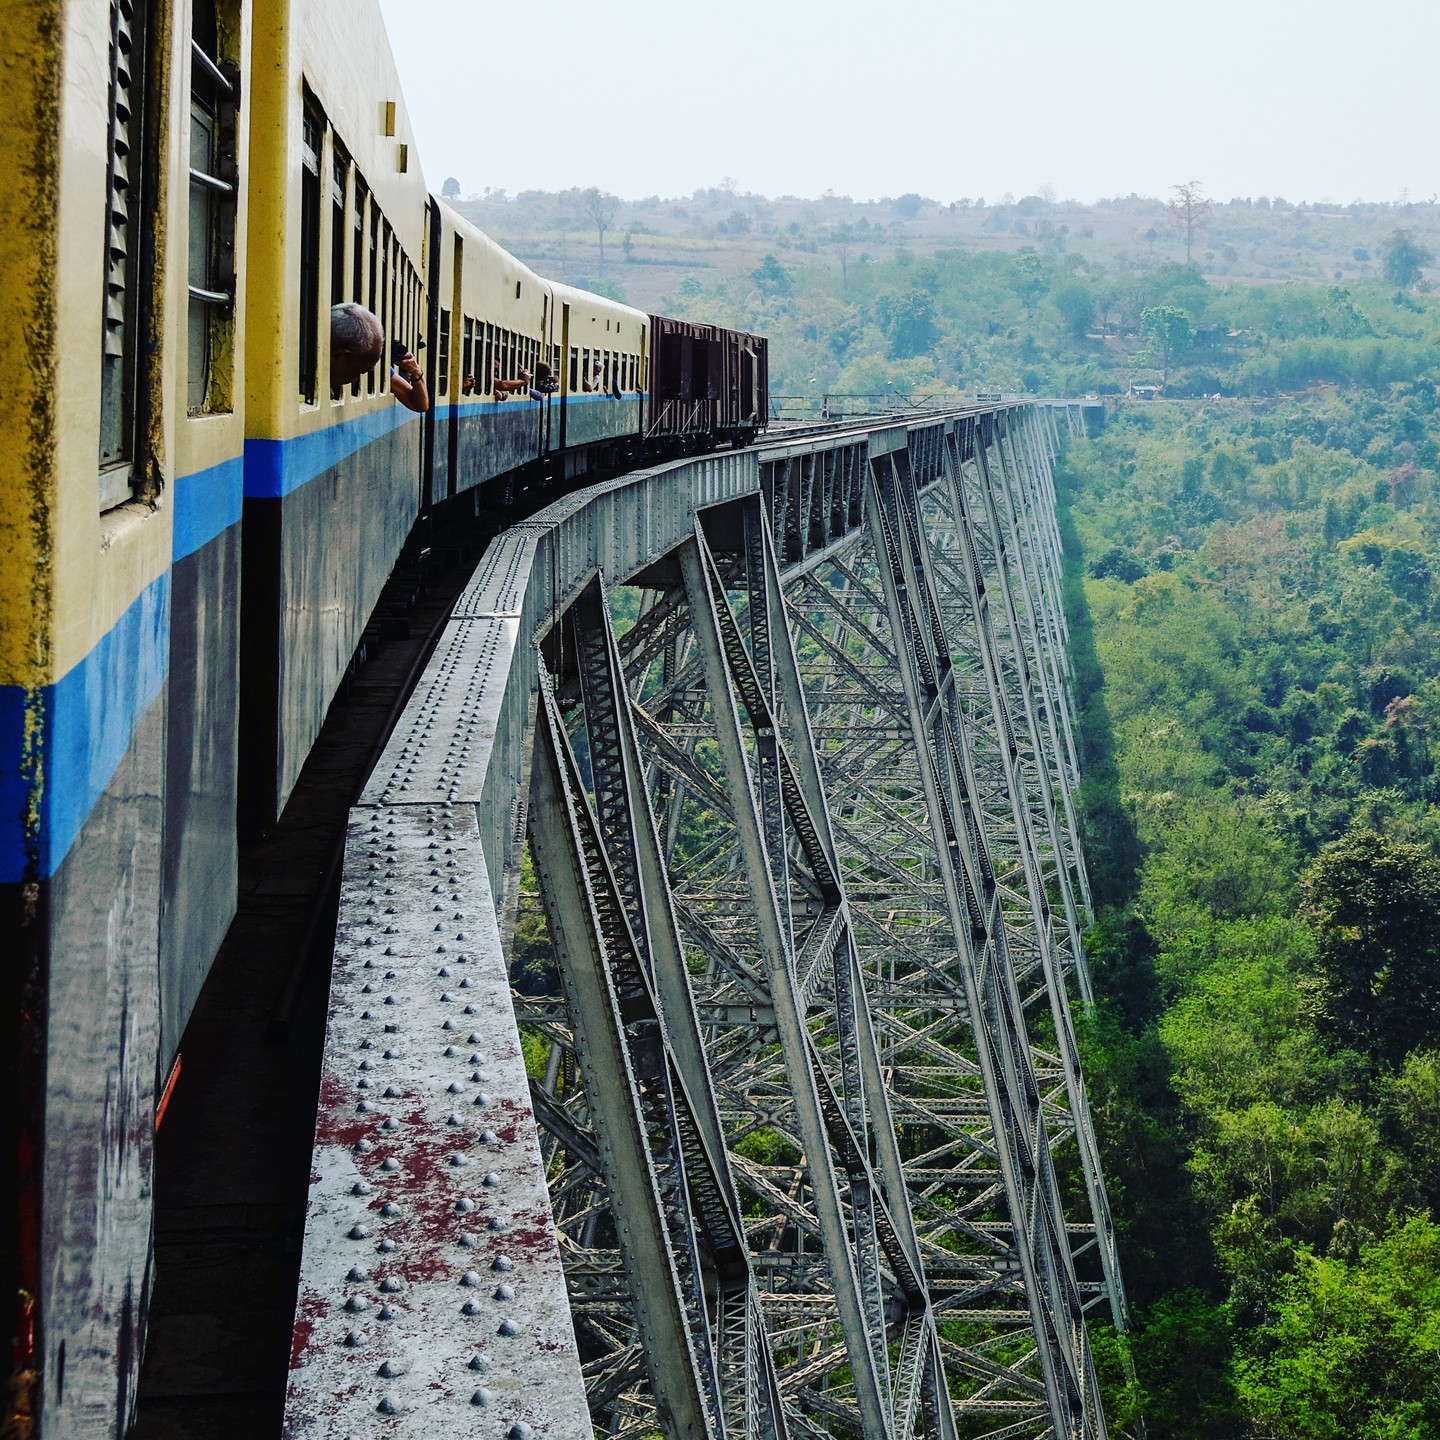 Scenic Train Rides in Asia - Goteik Viaduct above a river gorge